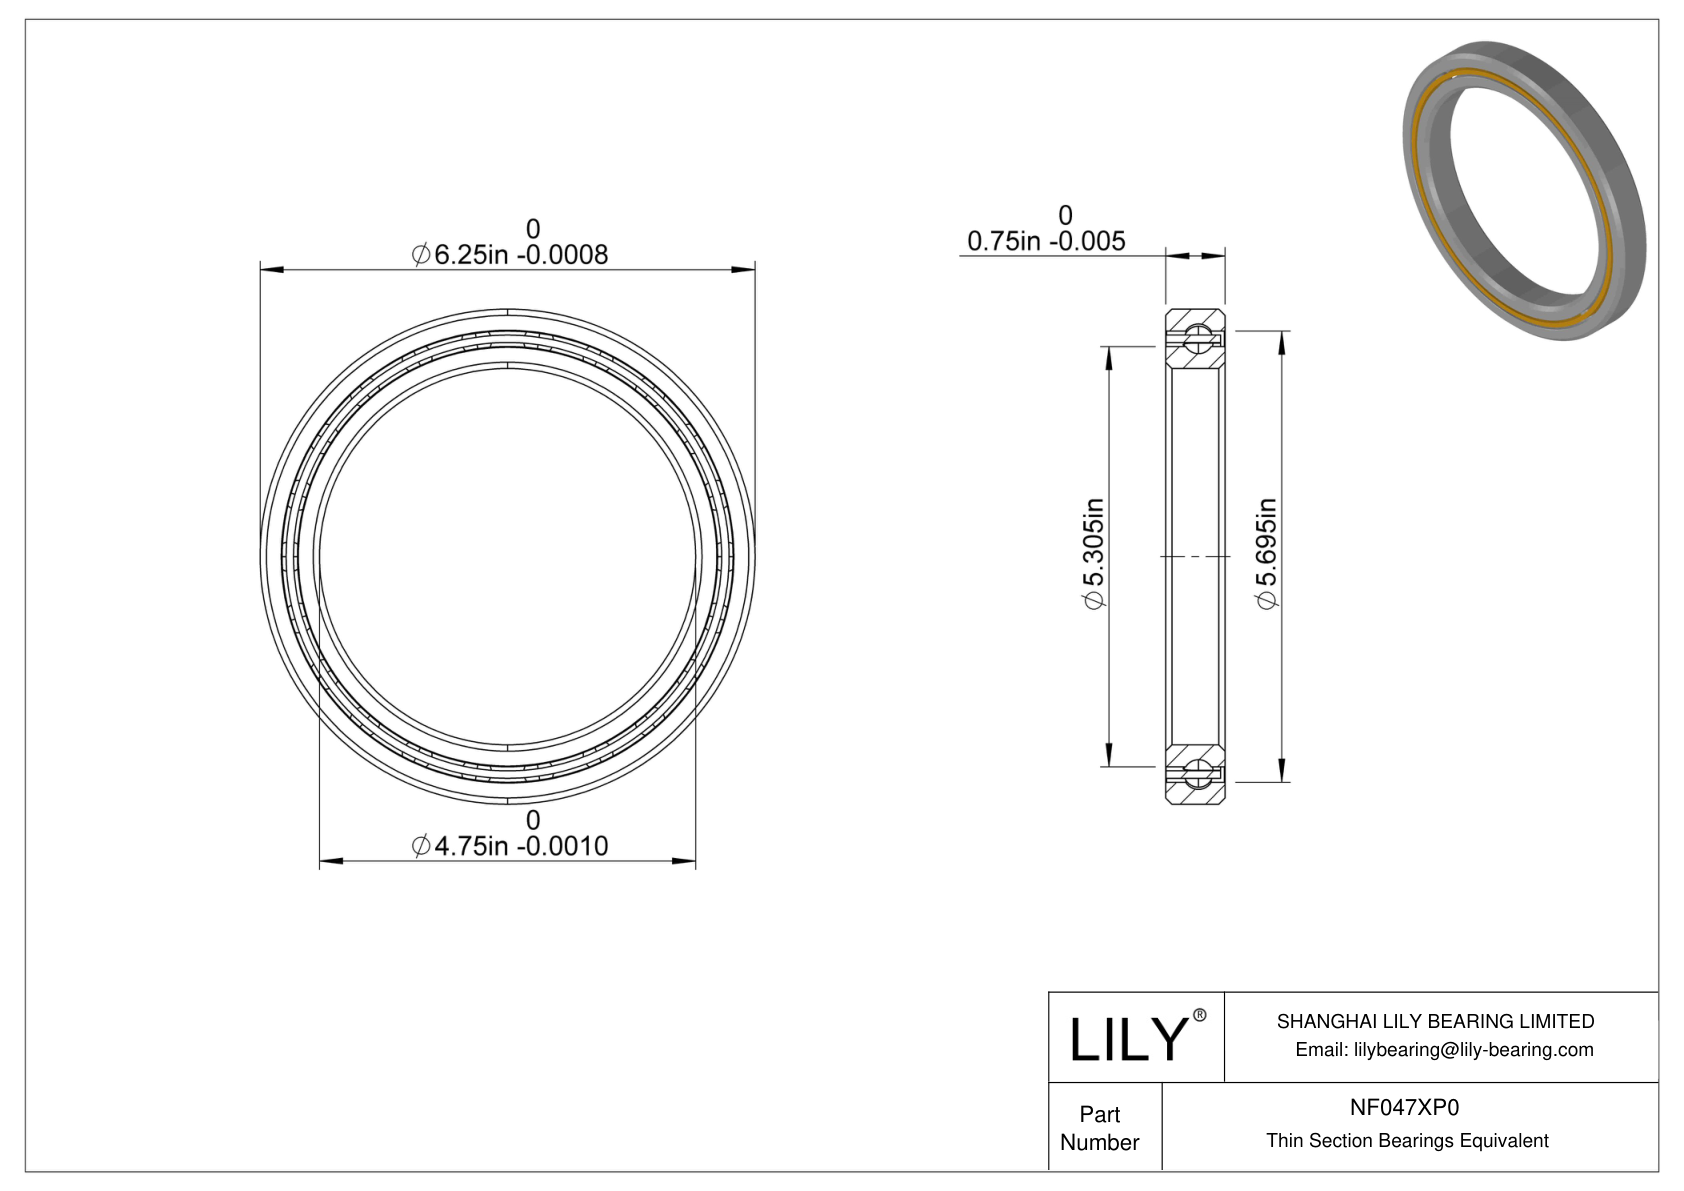 NF047XP0 Constant Section (CS) Bearings cad drawing